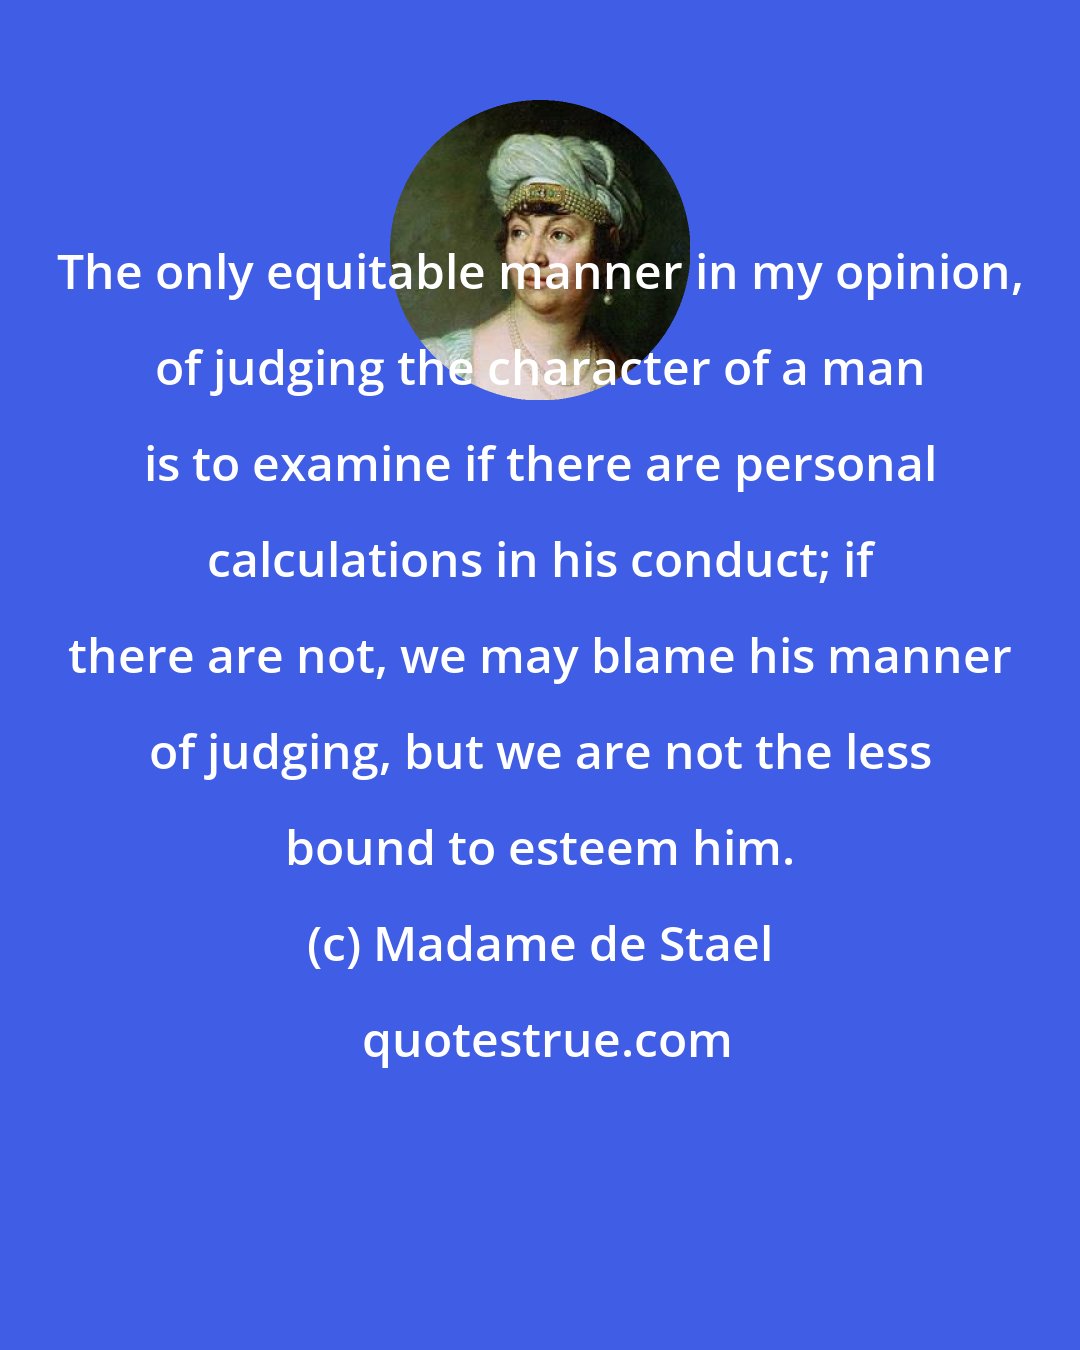 Madame de Stael: The only equitable manner in my opinion, of judging the character of a man is to examine if there are personal calculations in his conduct; if there are not, we may blame his manner of judging, but we are not the less bound to esteem him.